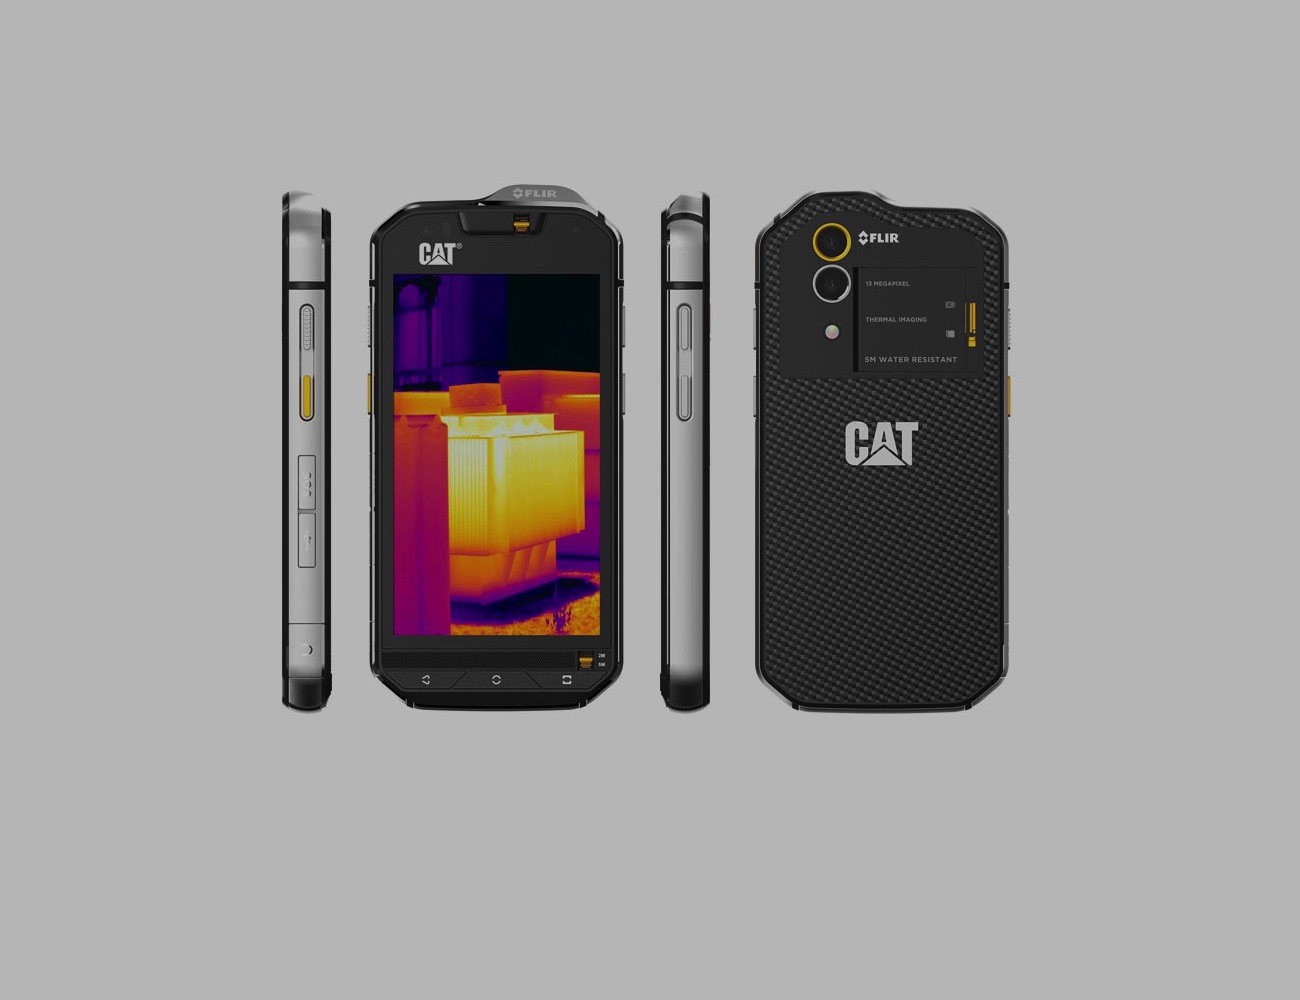 Cat S60 – Unique Smartphone With Integrated Thermal Camera